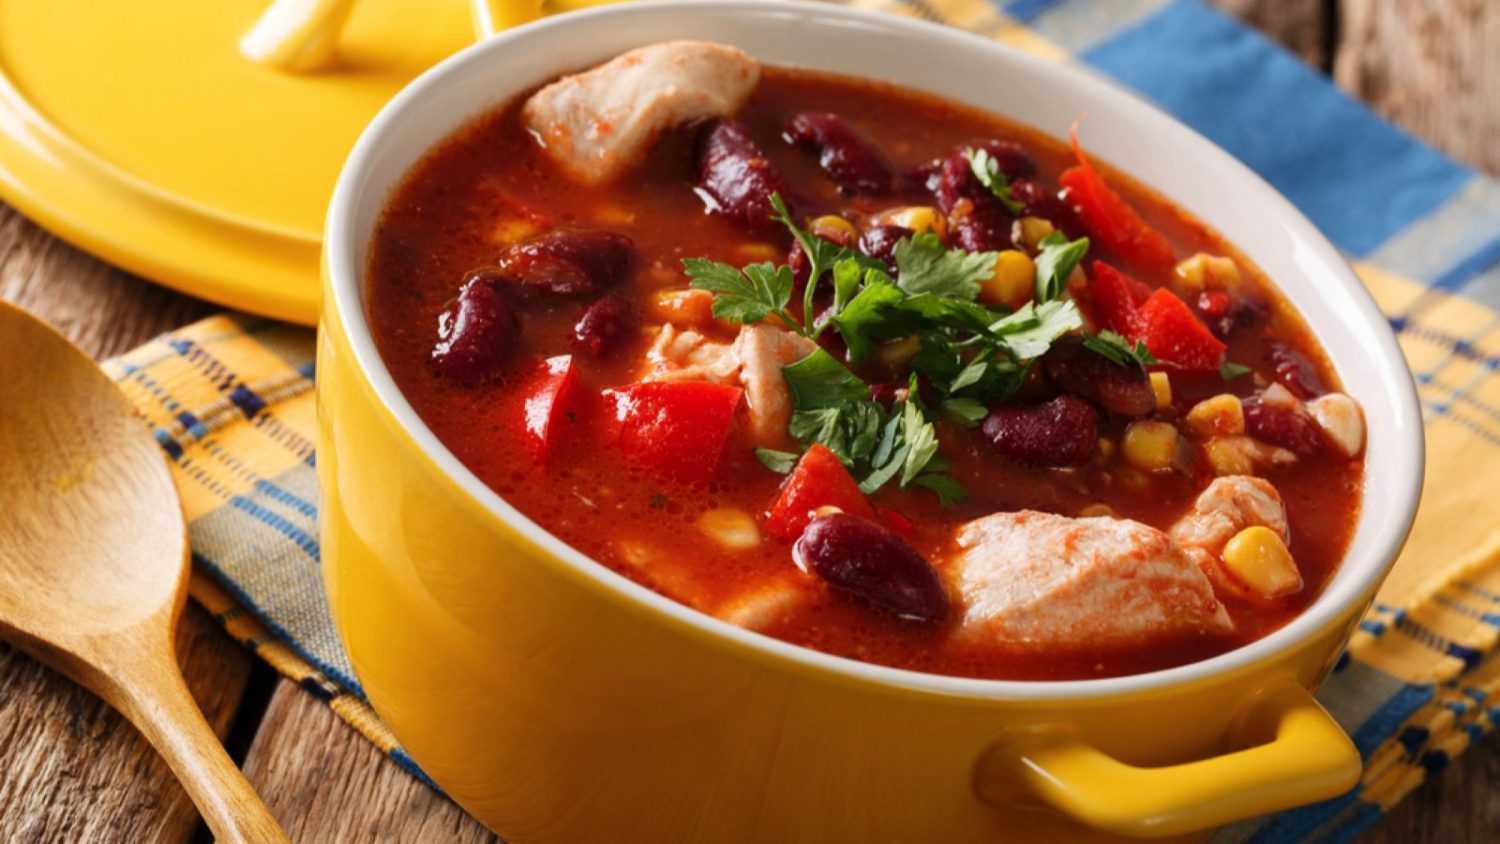 Spicy chicken with chili, red beans, corn and tomatoes close-up in a bowl on the table. horizontal